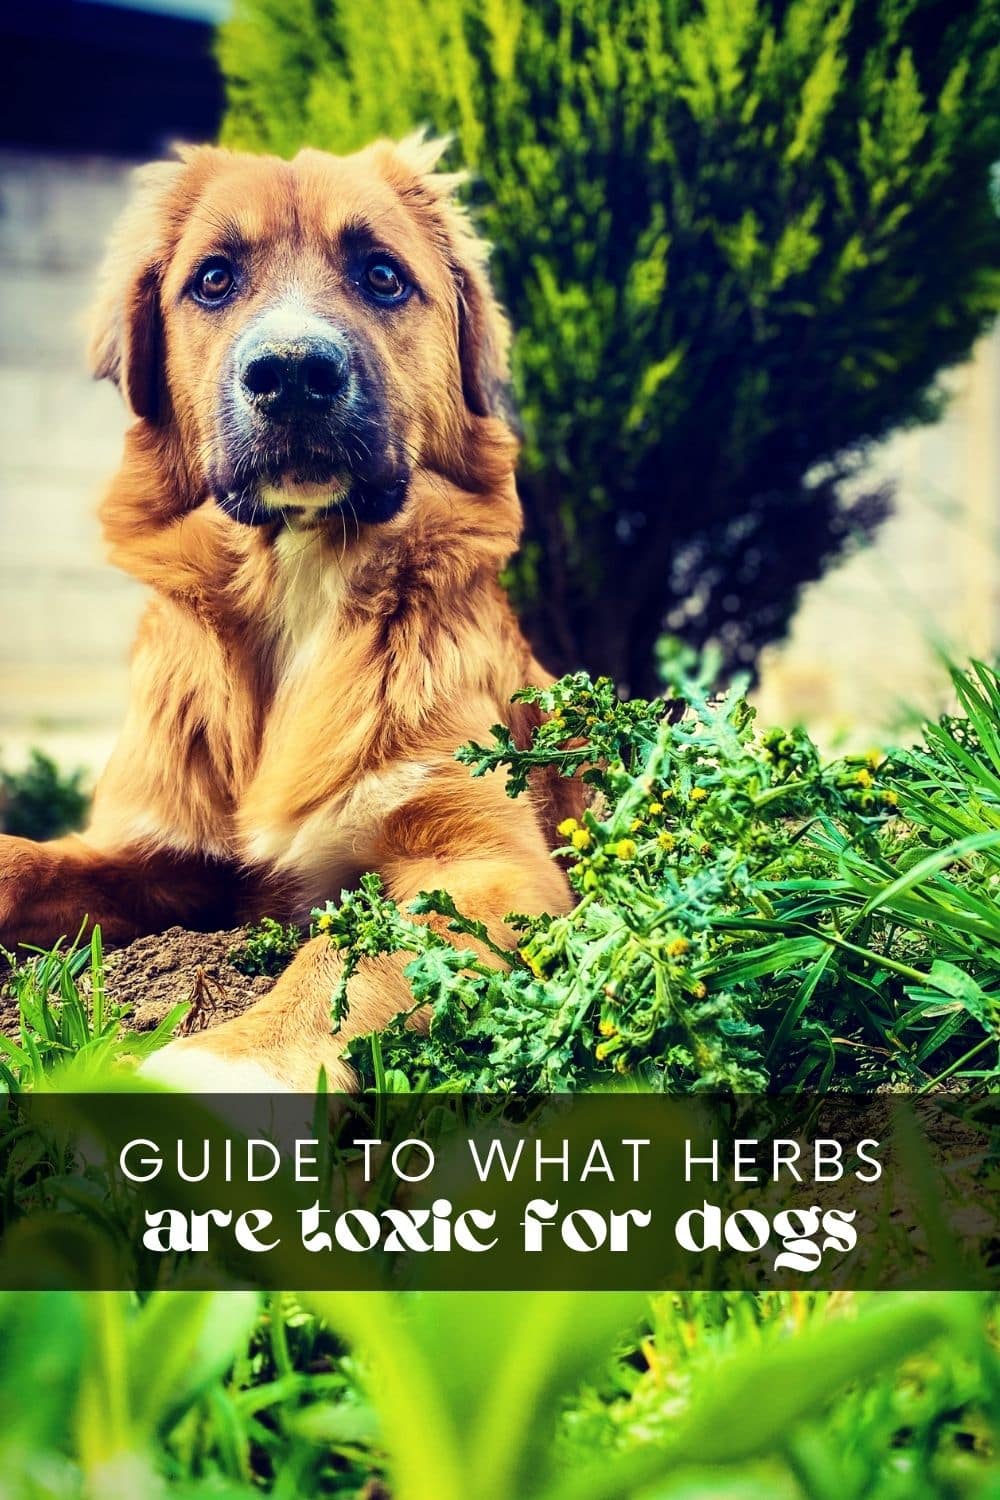 Dogs are more than just pets; they’re part of the family. As such, it's important to keep them safe and healthy. Letting your furry friend finish your dinner leftovers may be tempting, but it's not always the best idea. Some herbs and spices we regularly use to flavor our meals can actually be toxic to dogs!